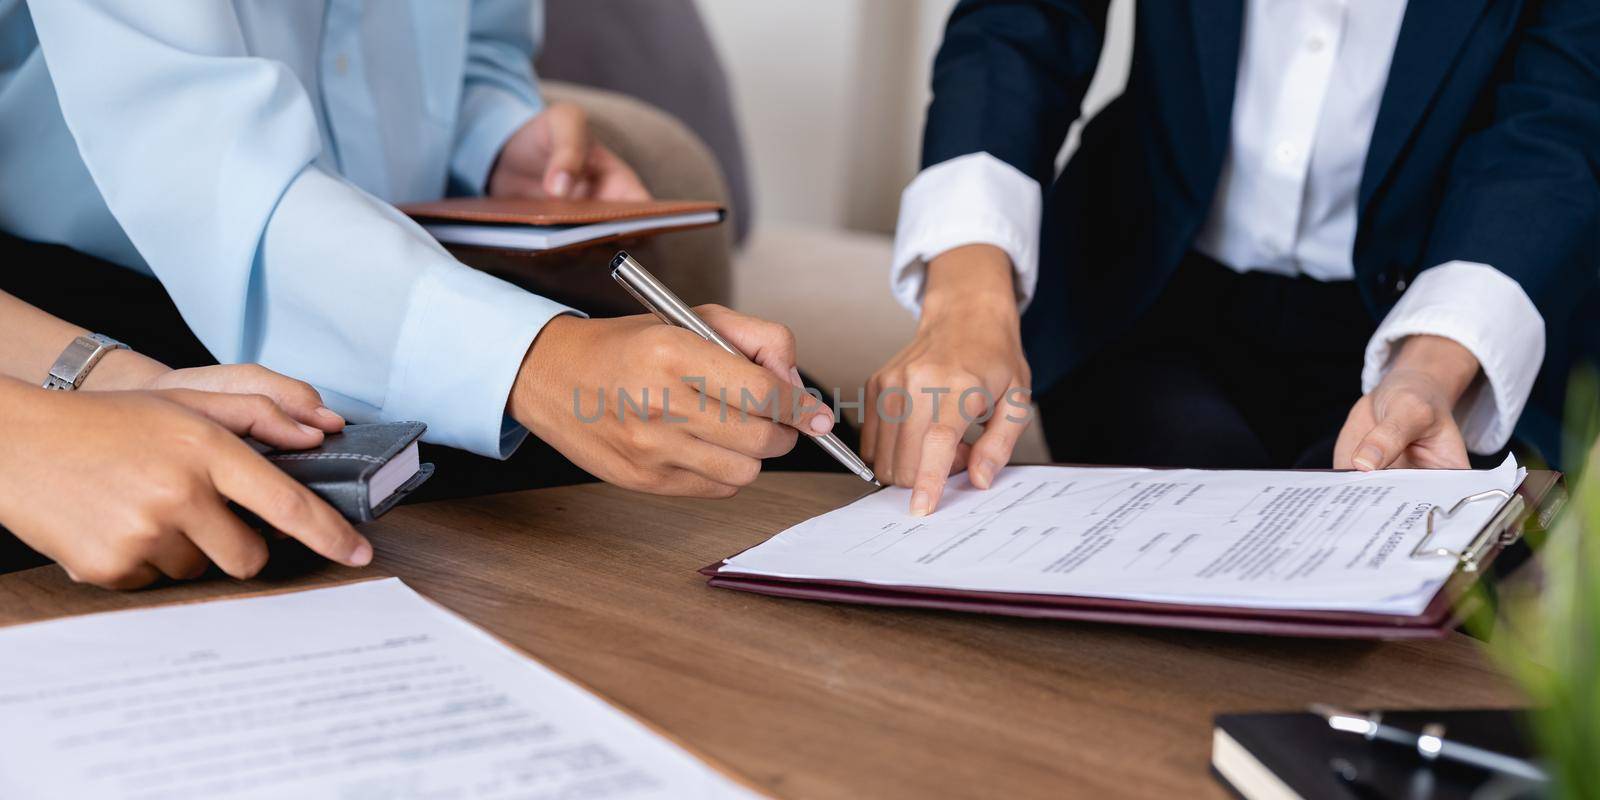 Couple clients signing paper contract with professional broker or realtor, after discussing agreement details.